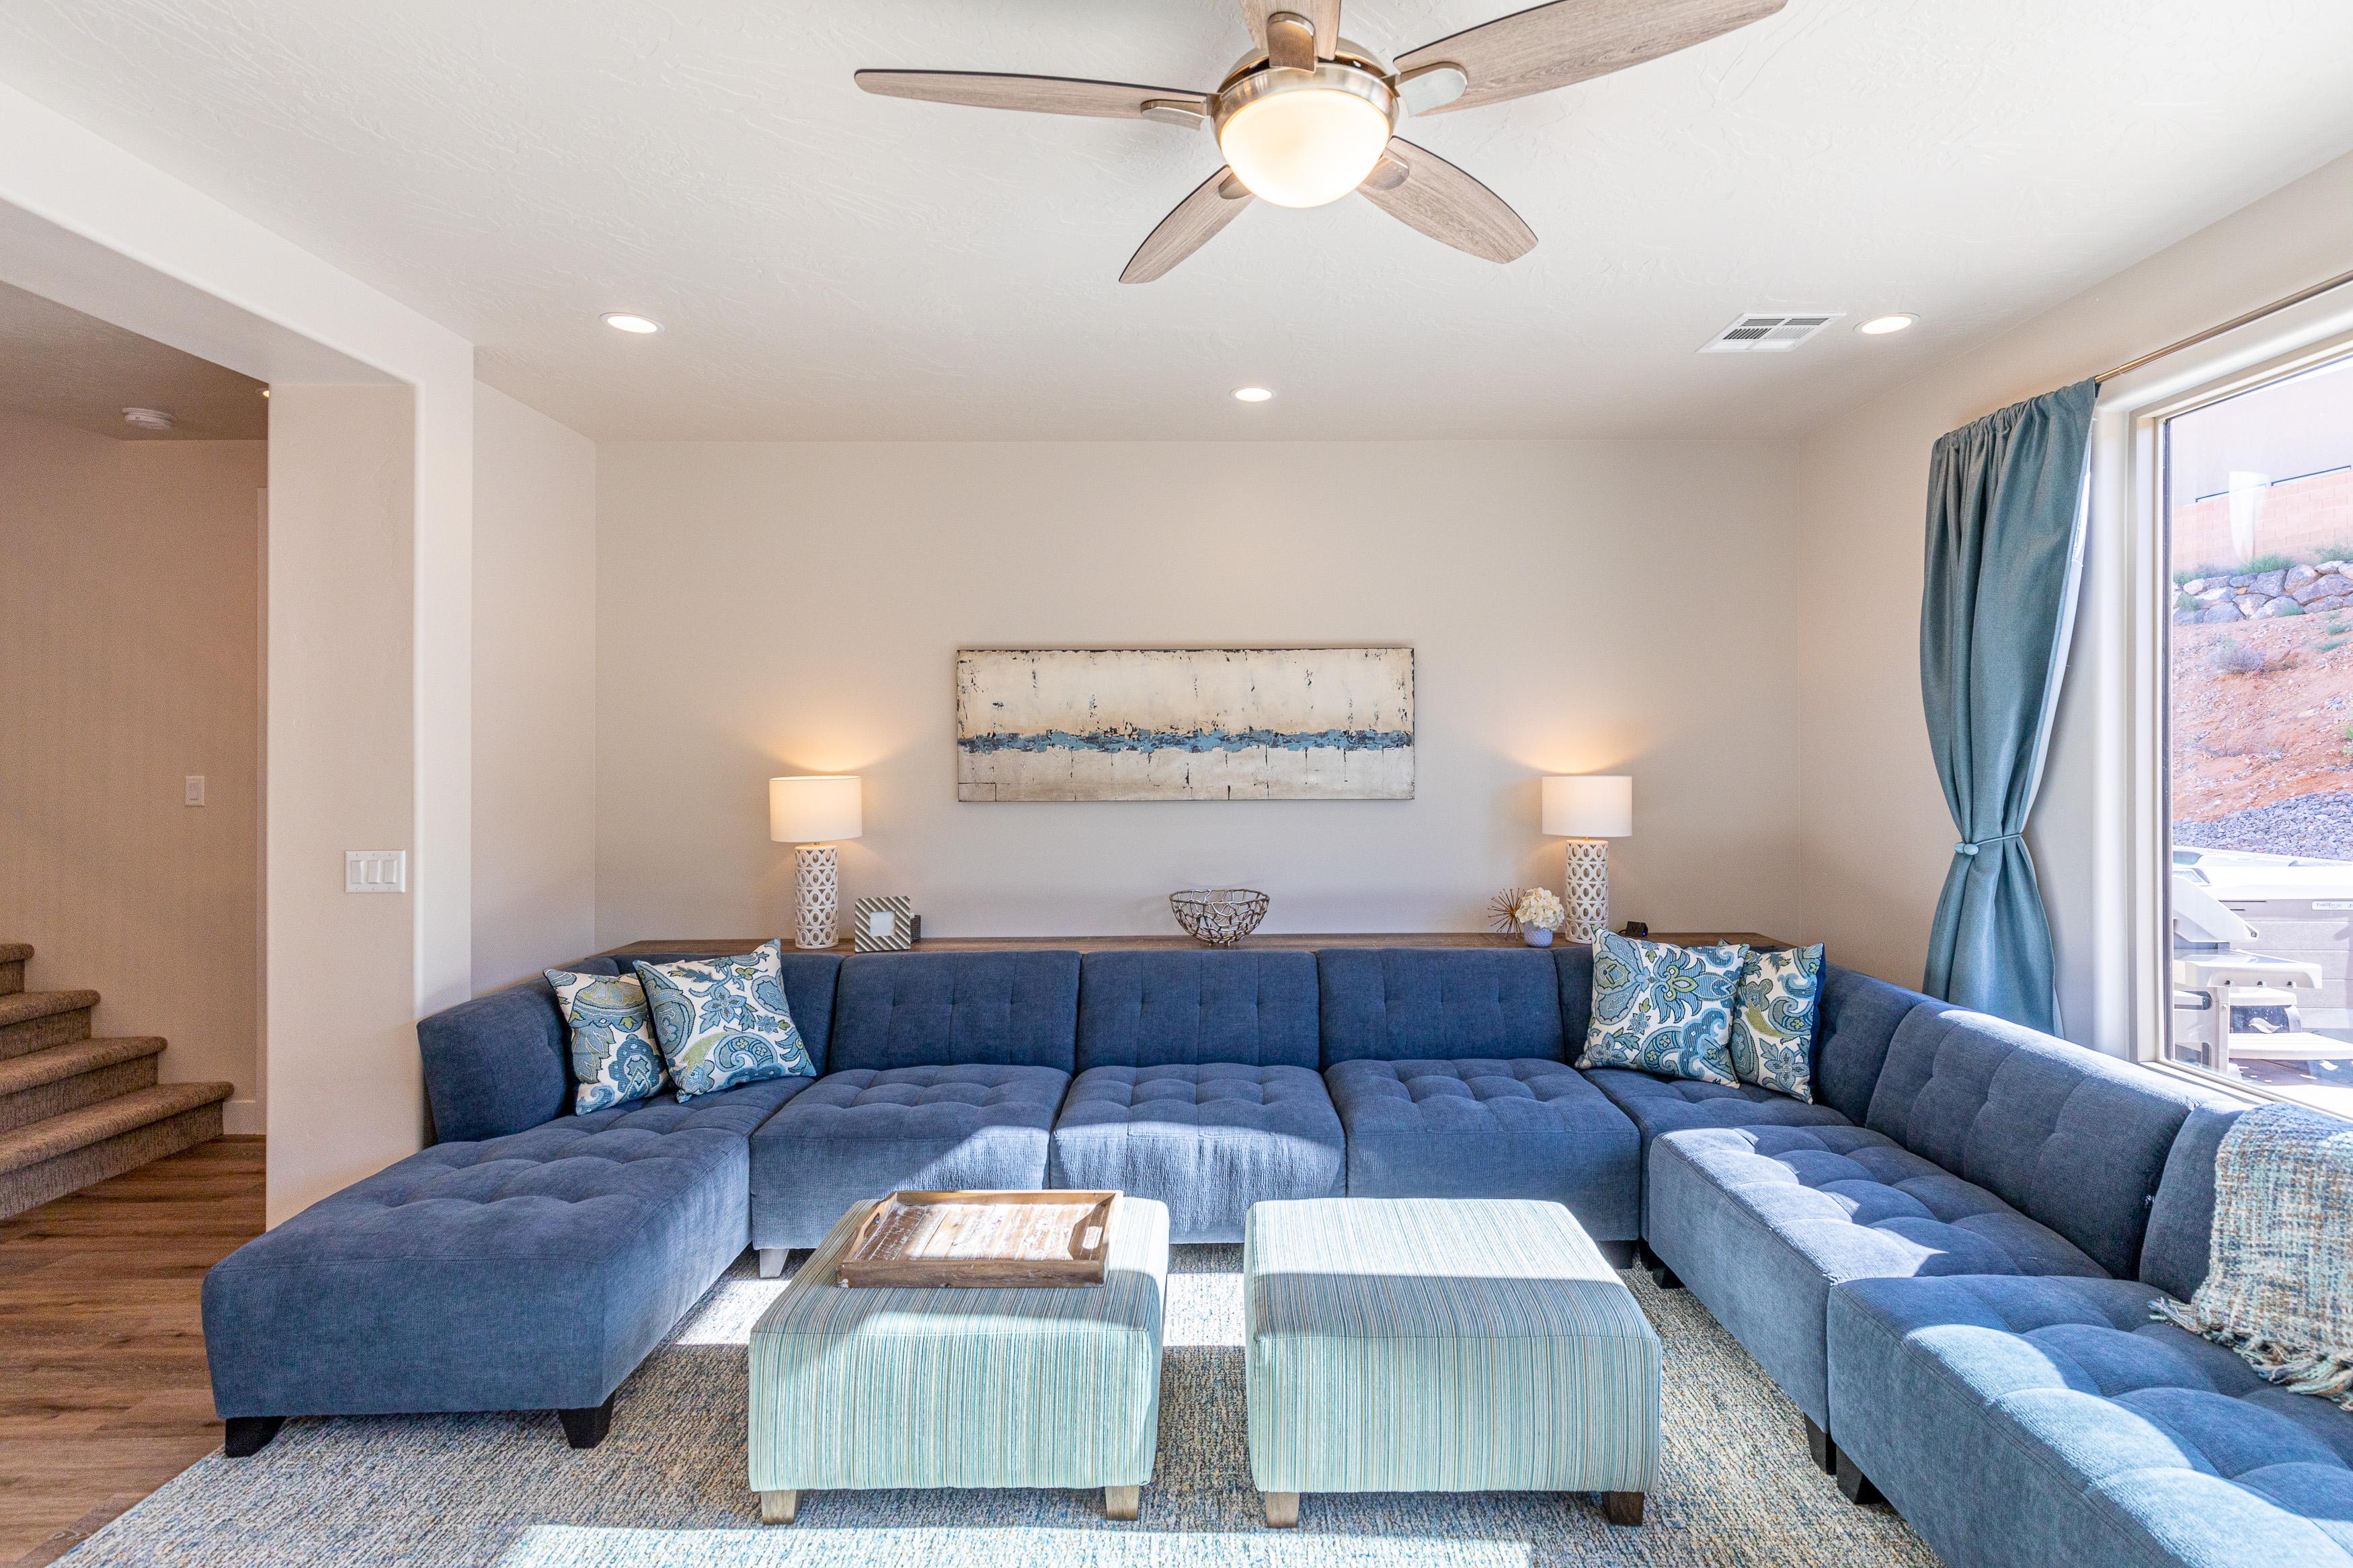 The living room is designed as an open floor plan and is a great gathering place for meals, games, or watching TV during your stay. 